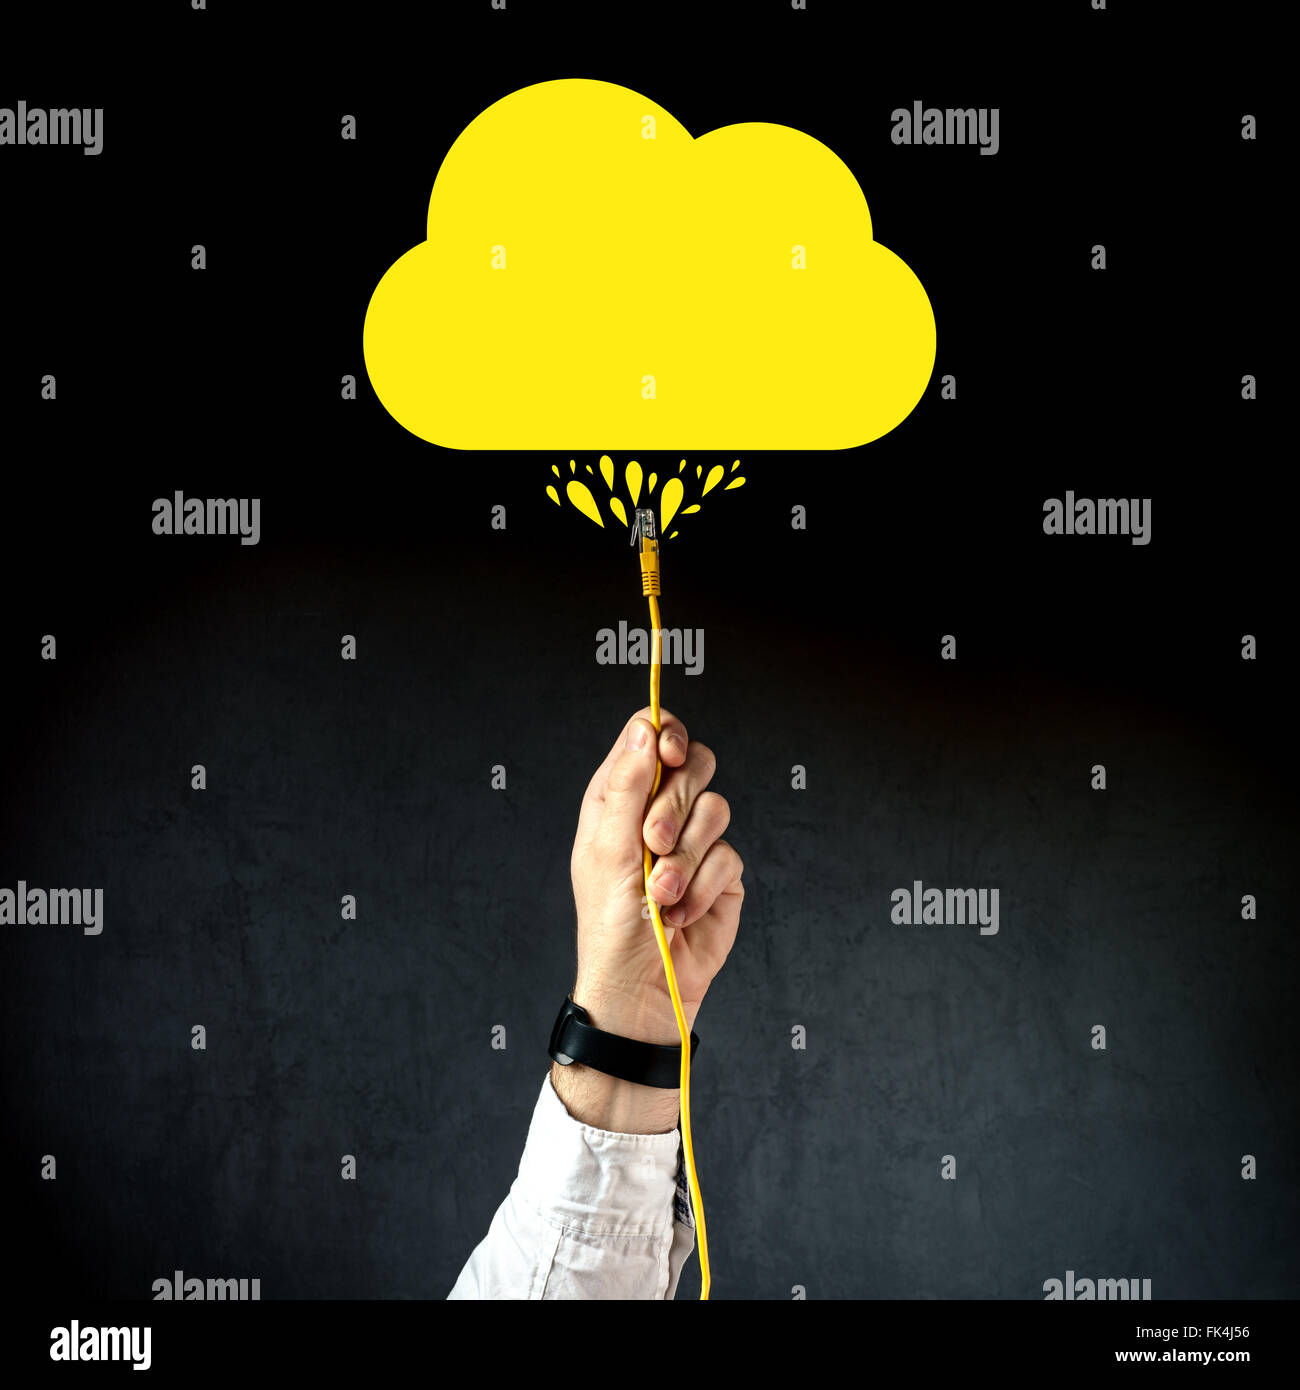 Businessman plugging LAN cable to connect to cloud service, internet technology cloud computing concept, business solution. Stock Photo